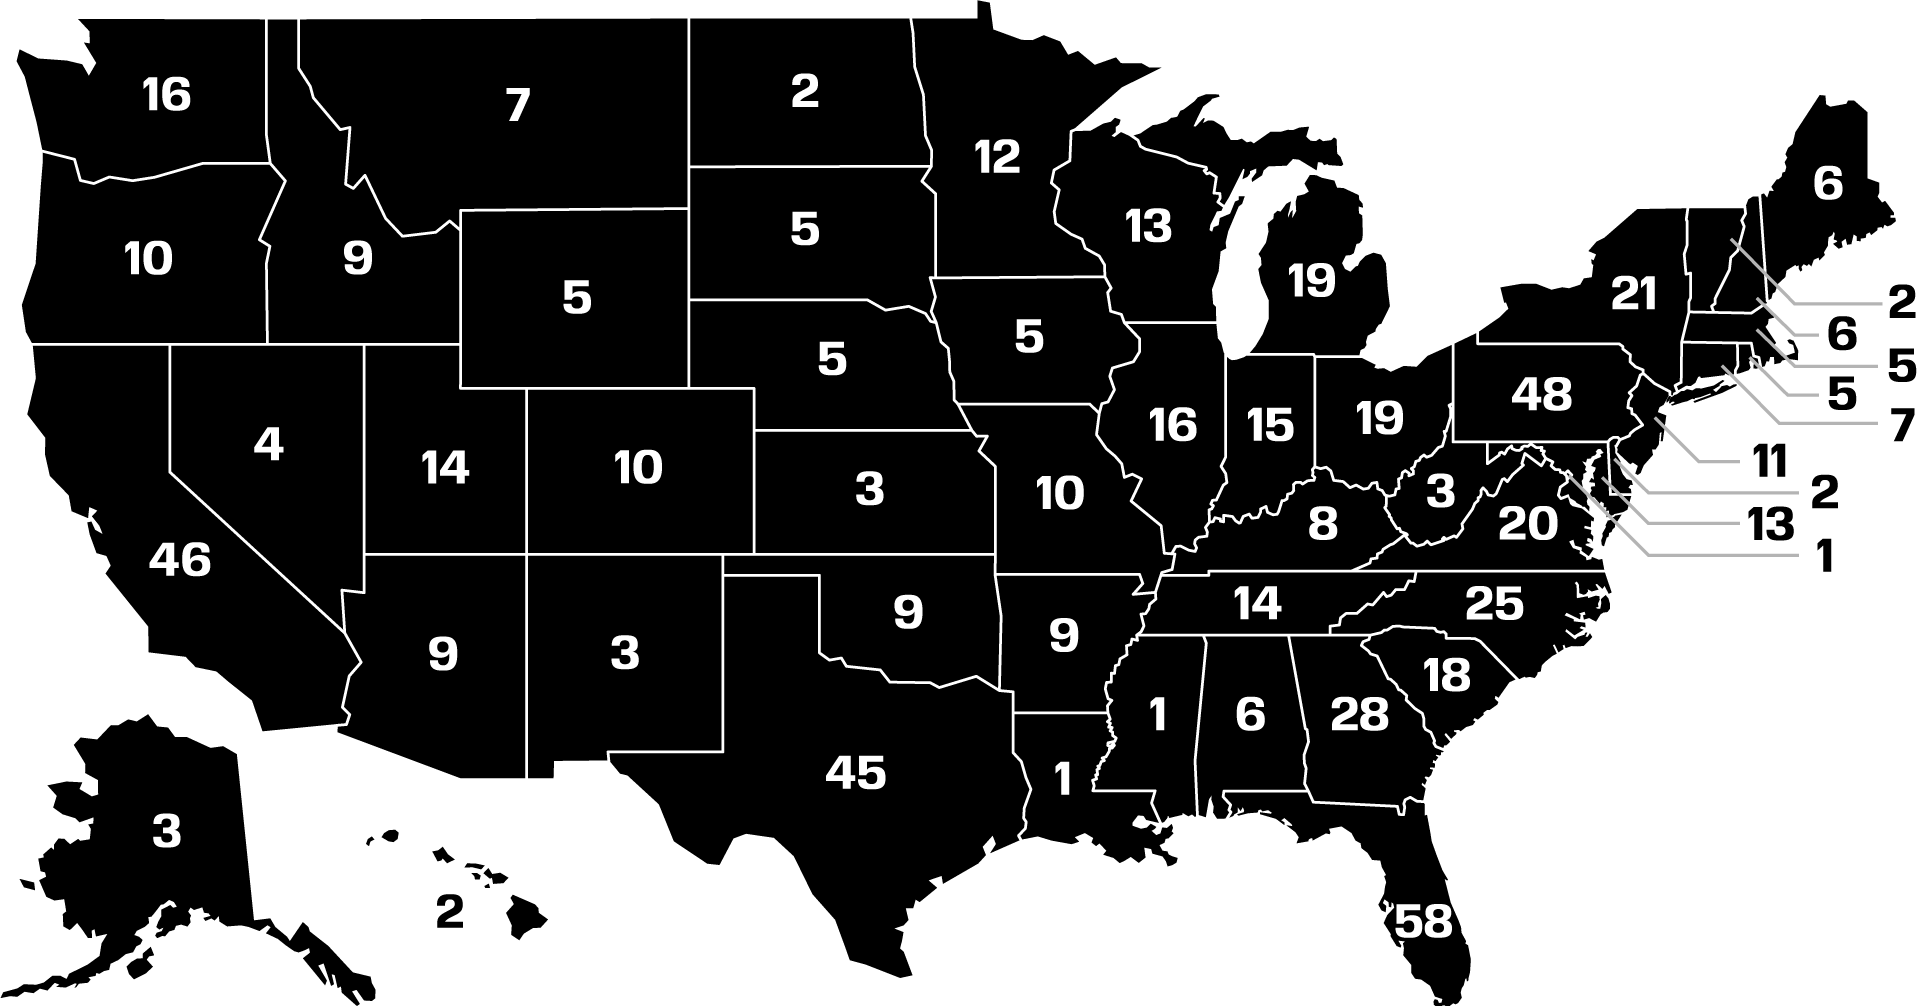 a map of the United States with the number of General Hate groups in each state